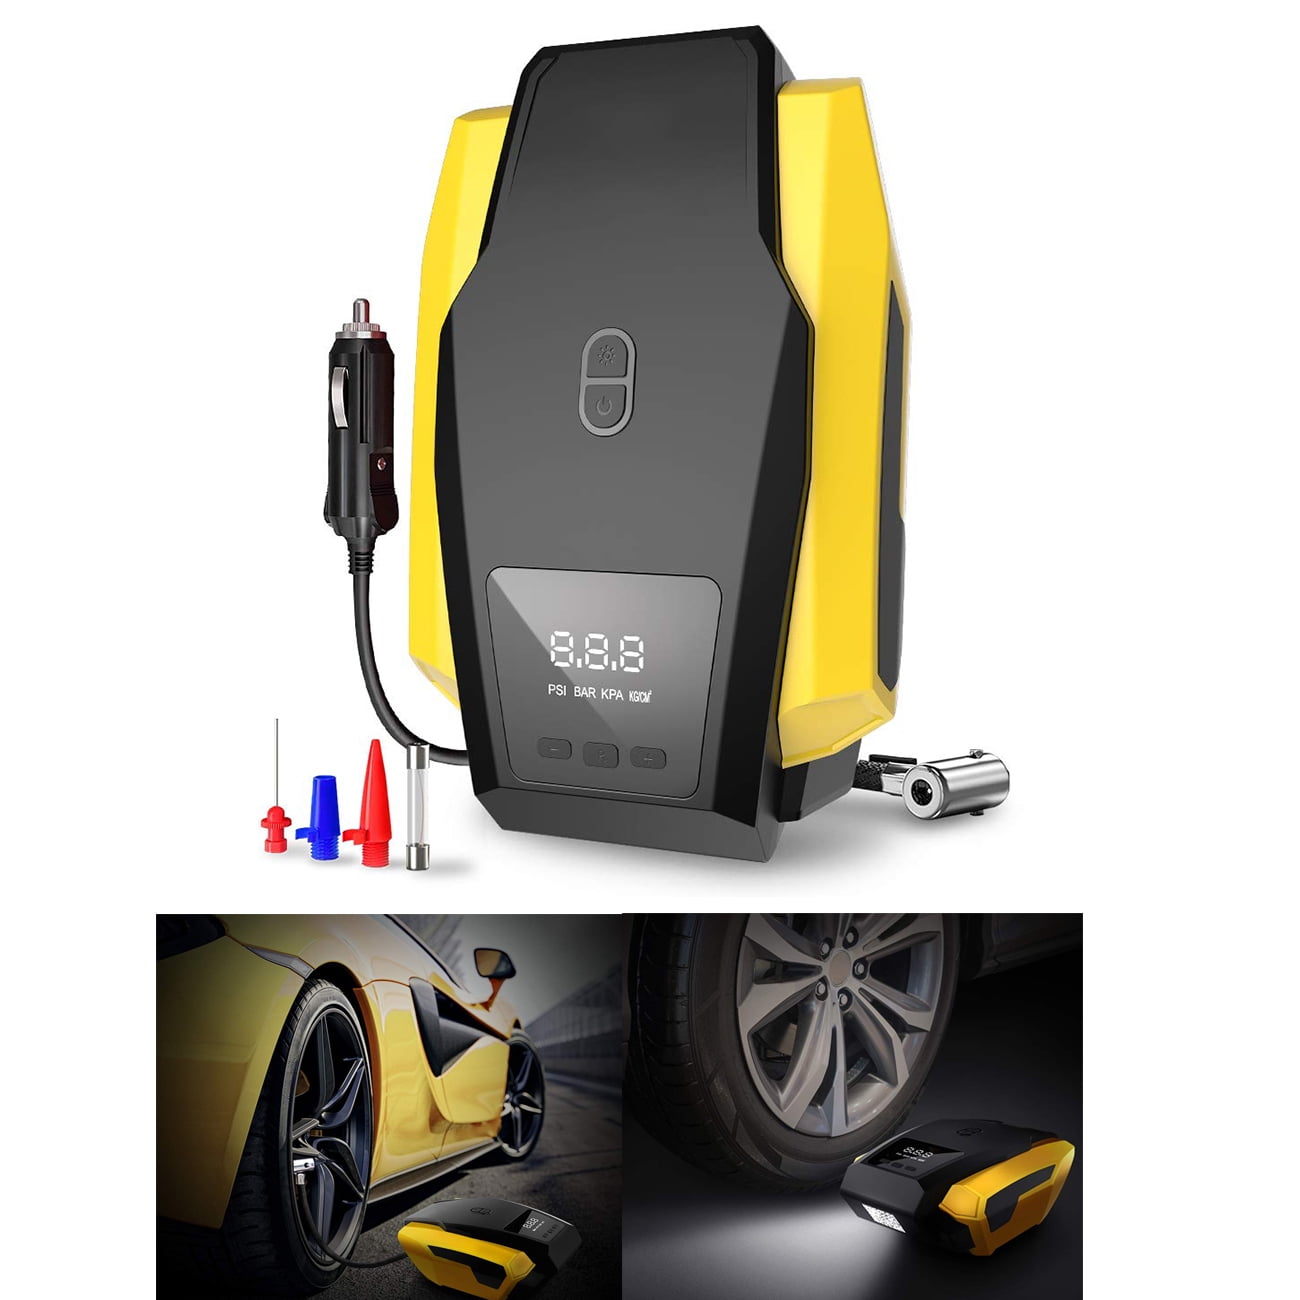 Favoto Car Auto Tyre Inflator Air Compressor Pump Portable with DIgital Pressure Gauge DC12V for Car SUV MPV or Ball Airbed Bike 